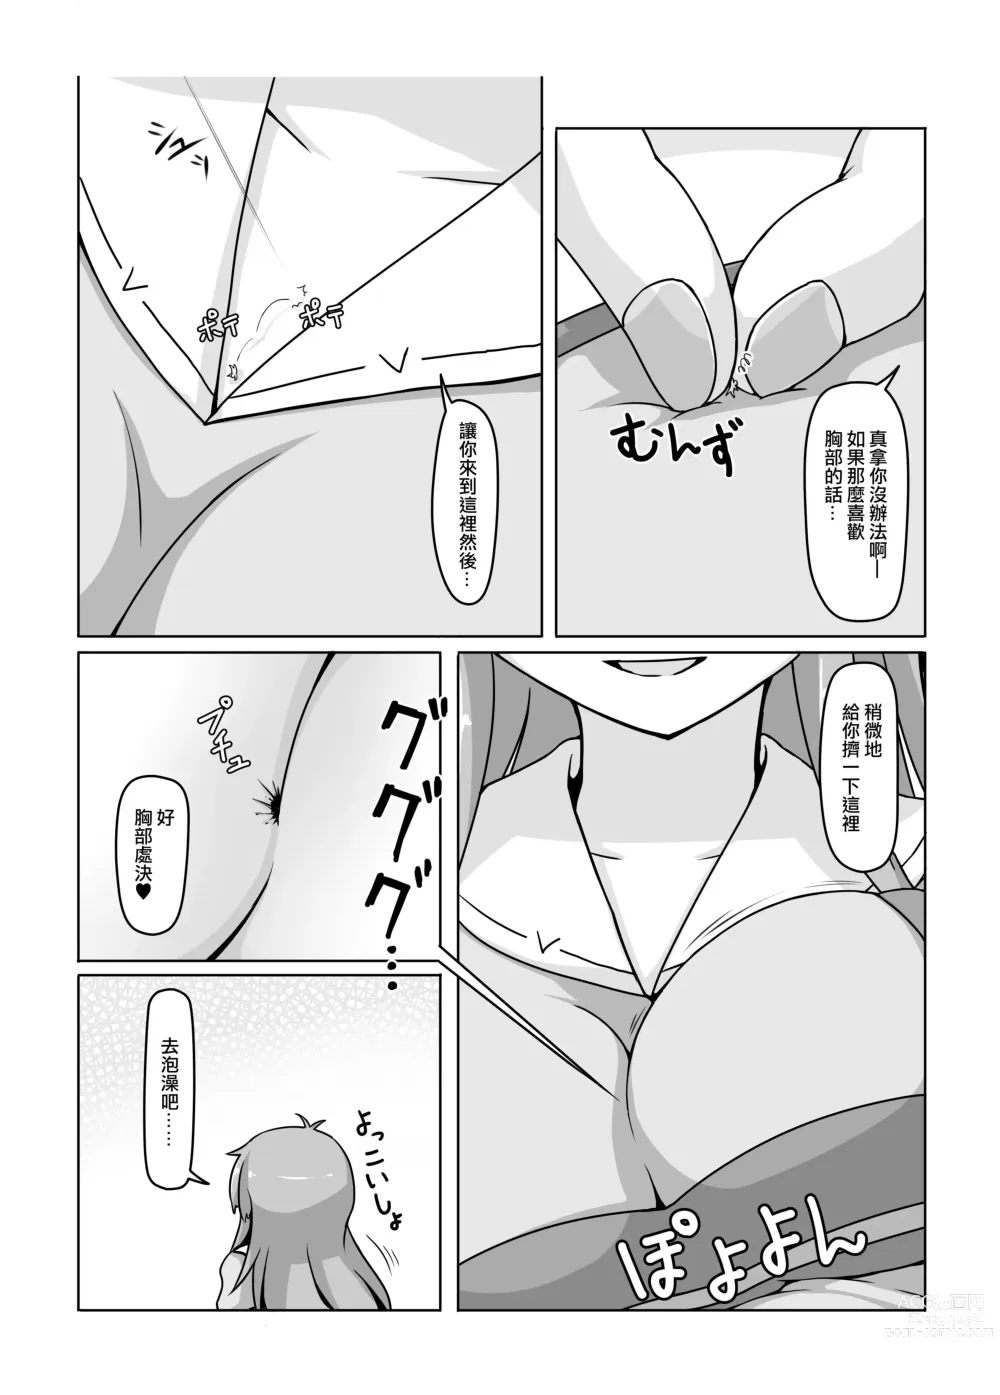 Page 10 of doujinshi 小小人類就由我來衰退